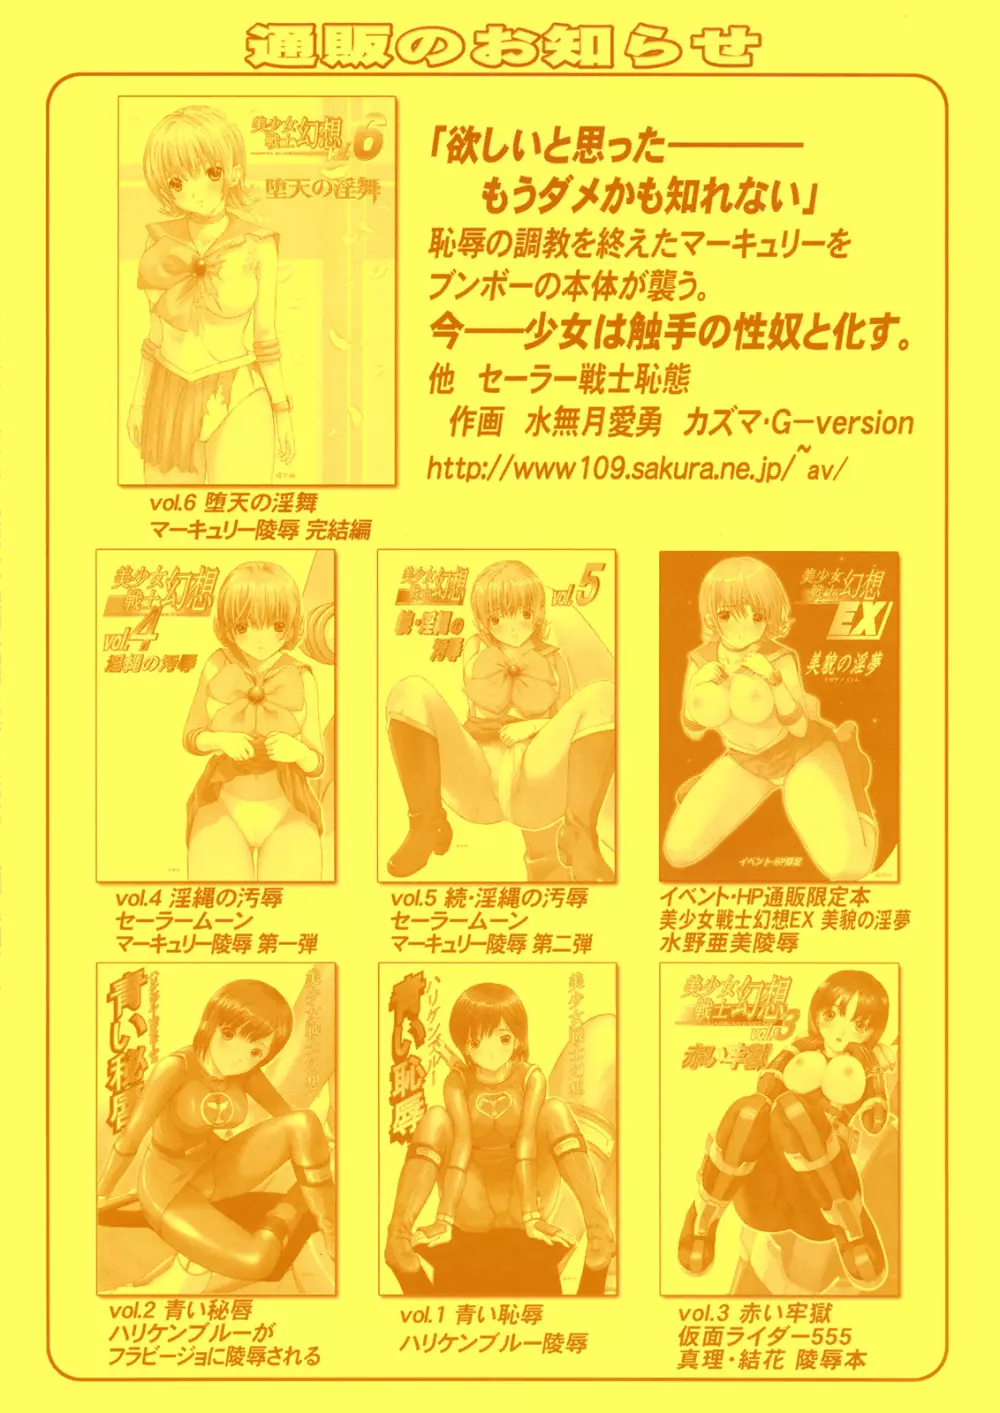 TIMTIMマシン SPECIAL CODE: A Page.10